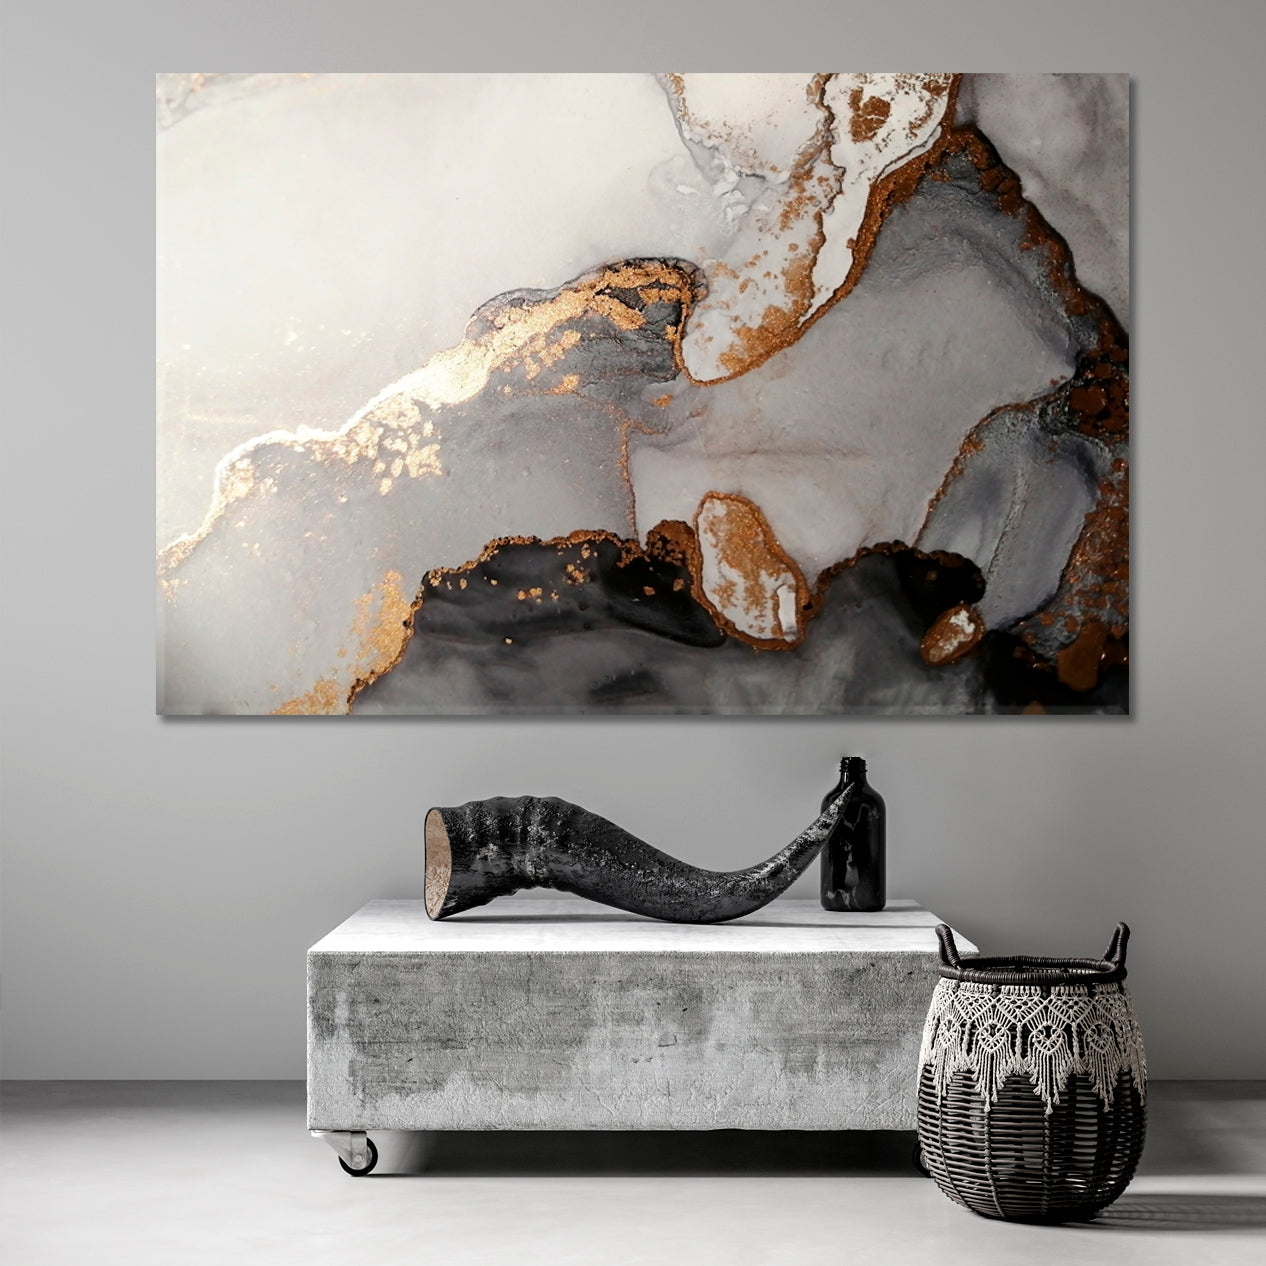 FLUID ART Black and Gold Effect Luxury Abstract Alcohol Ink Canvas Print Fluid Art, Oriental Marbling Canvas Print Artesty 1 panel 24" x 16" 